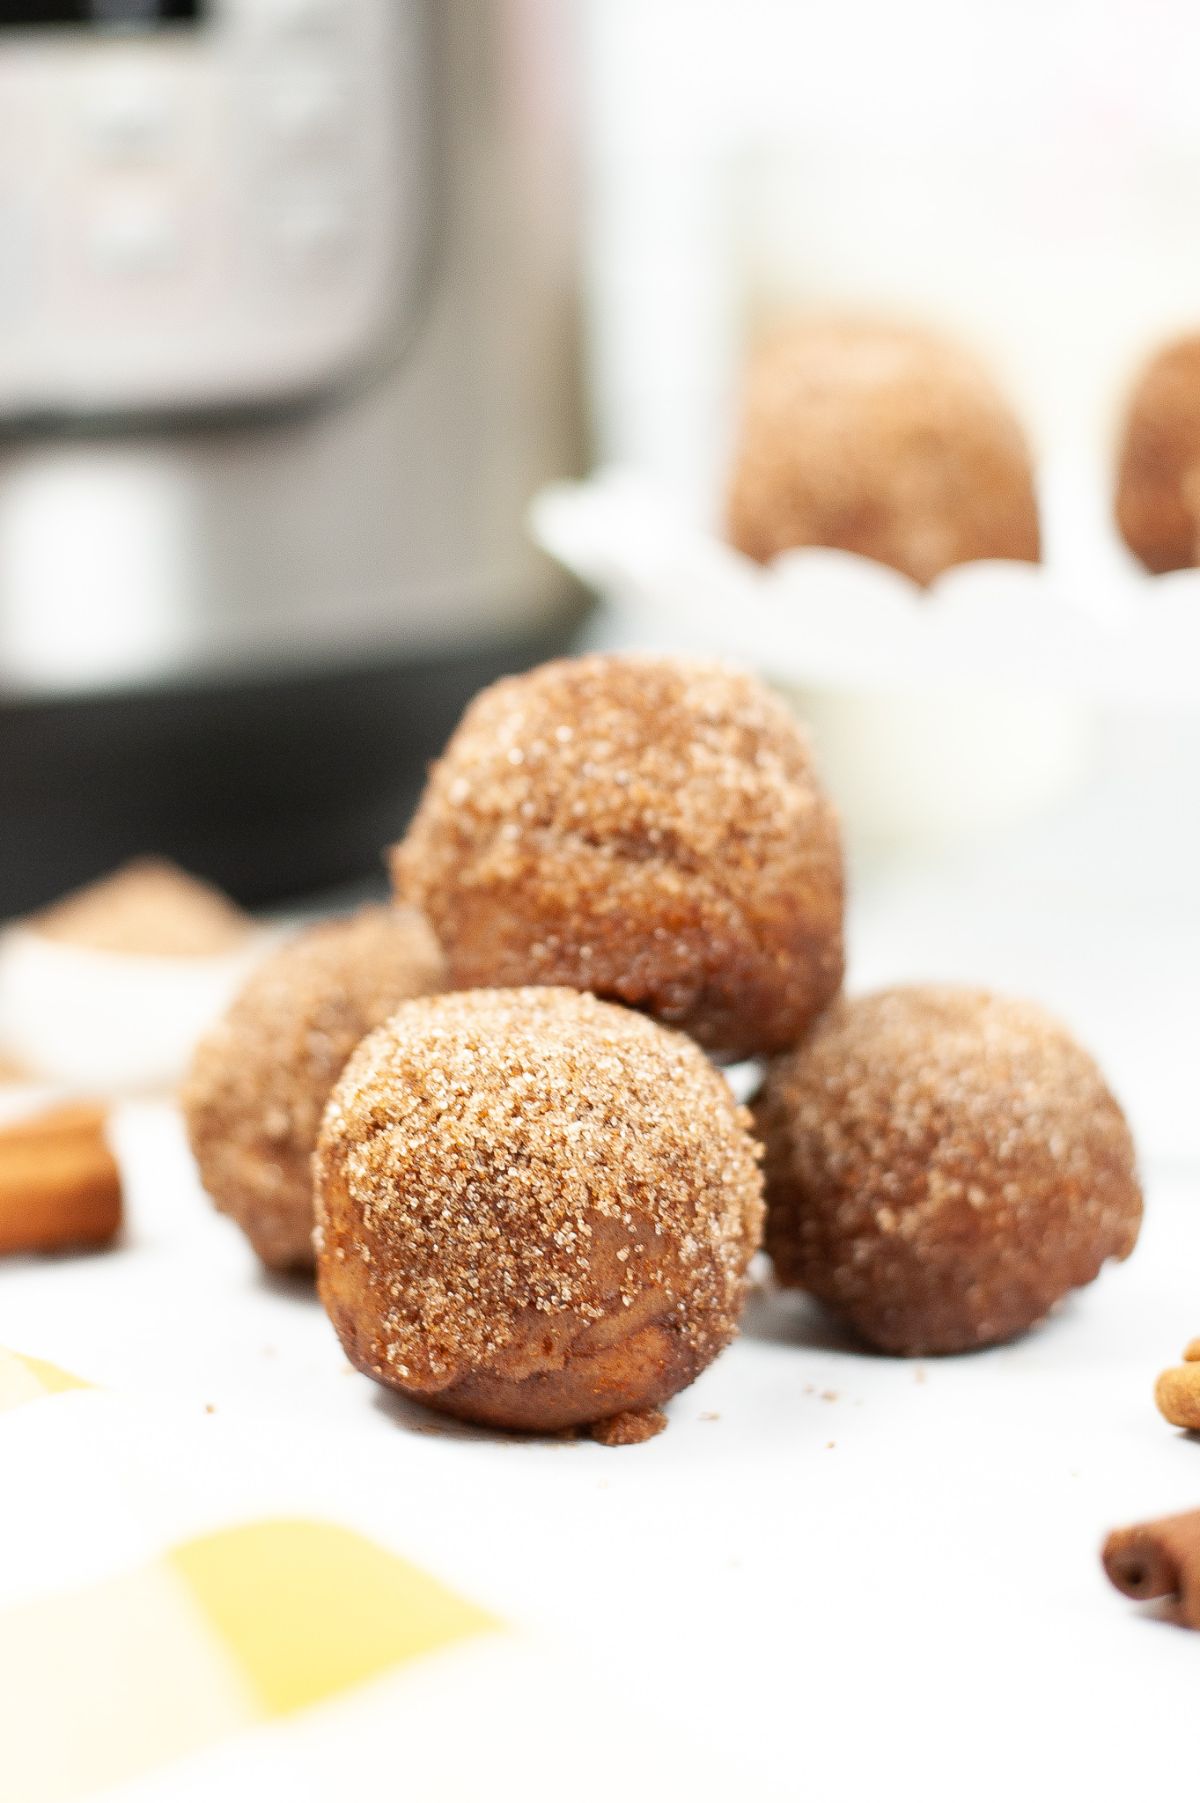 Instant Pot Churro Bites coated in cinnamon and sugar with an instant pot and more churro bites blurred in the background